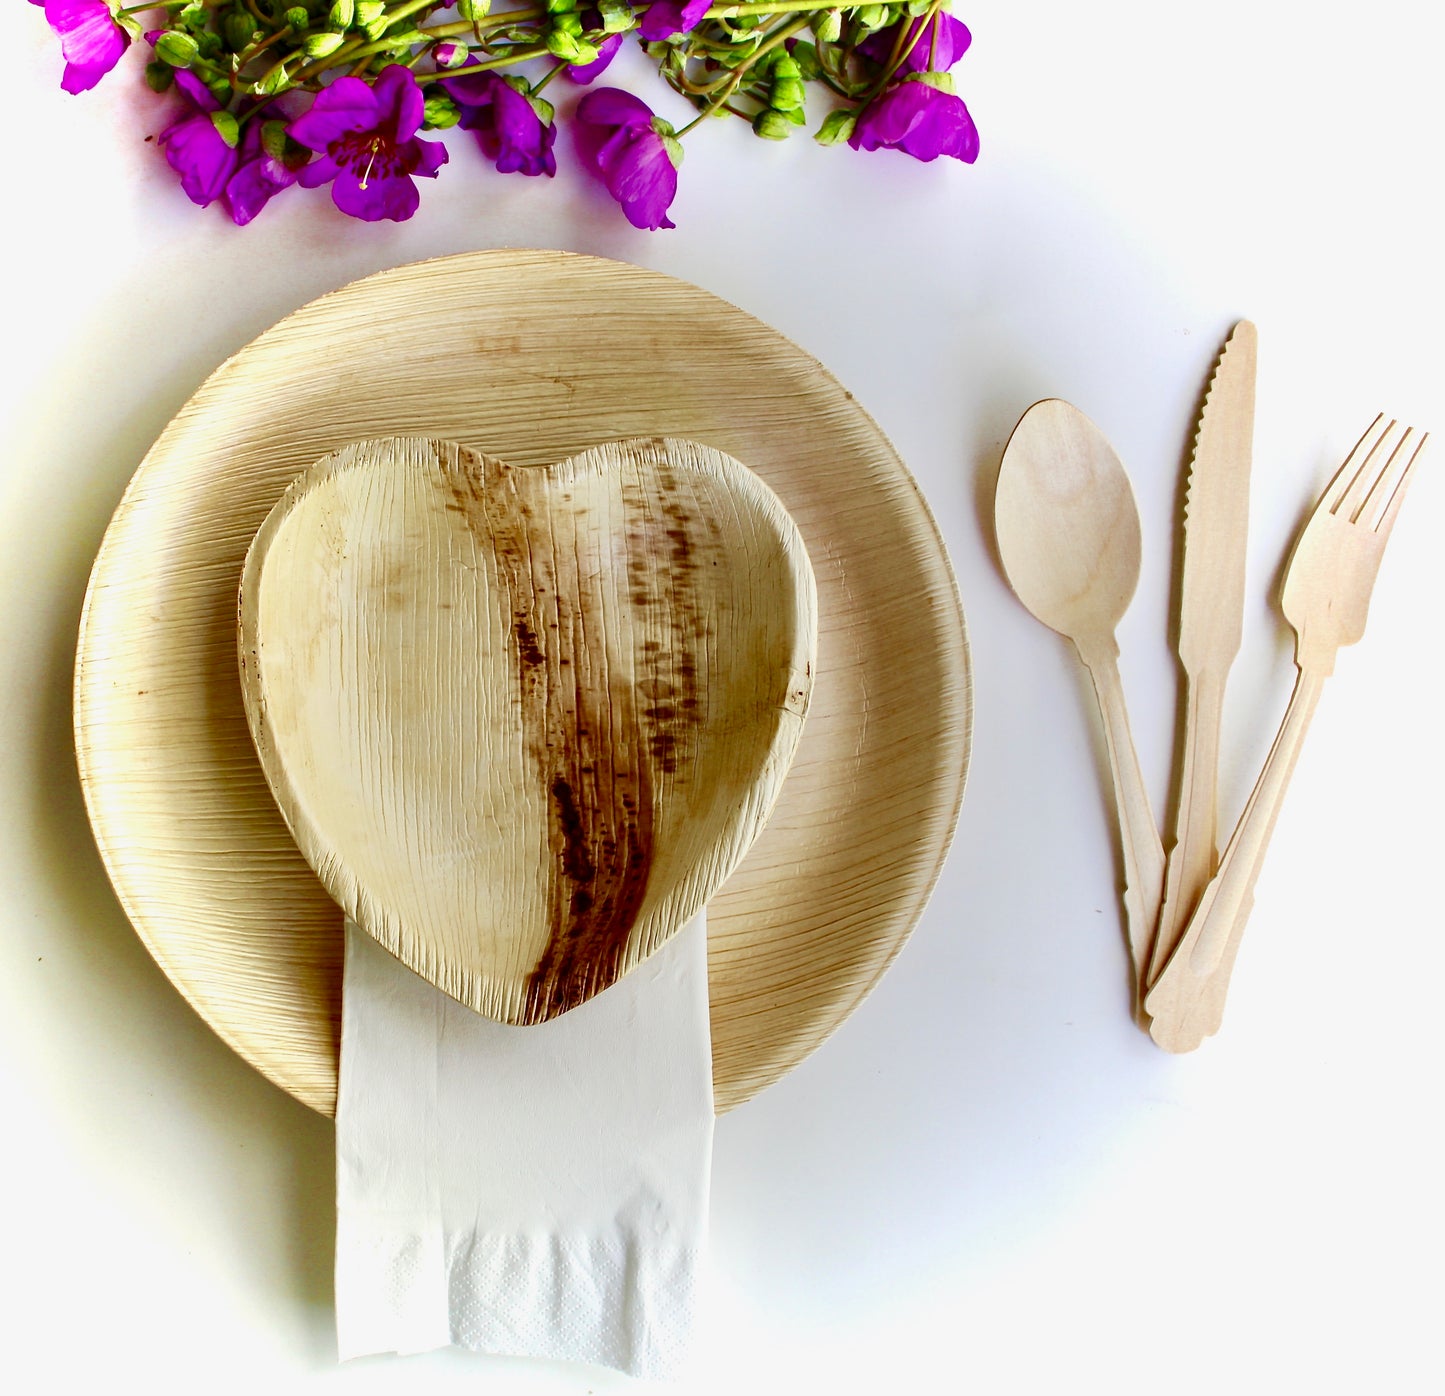 Bamboo Type palm leaf plate 10 pic 10" Round - 10 pic Haret- 75 pic Utensils 30 pic napkin